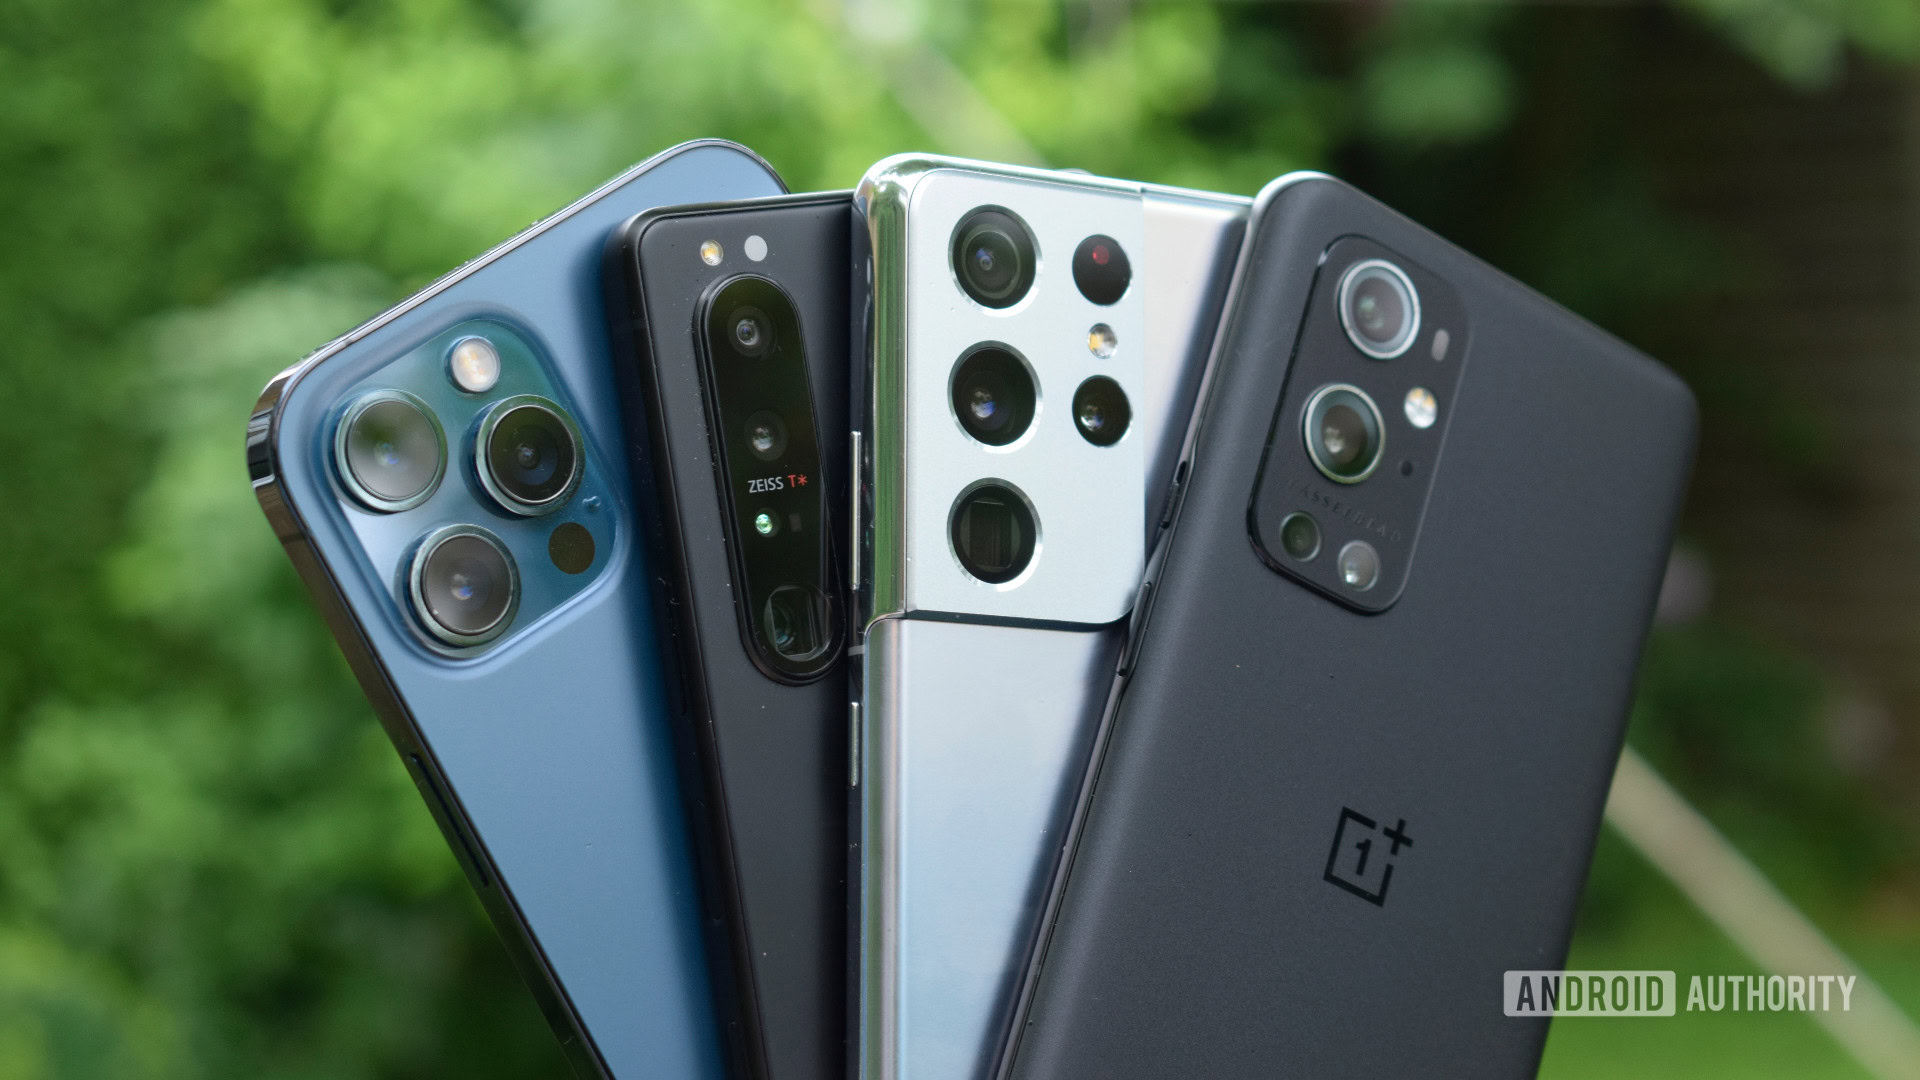 Mega shootout: The best camera phones of 2021 so far tested